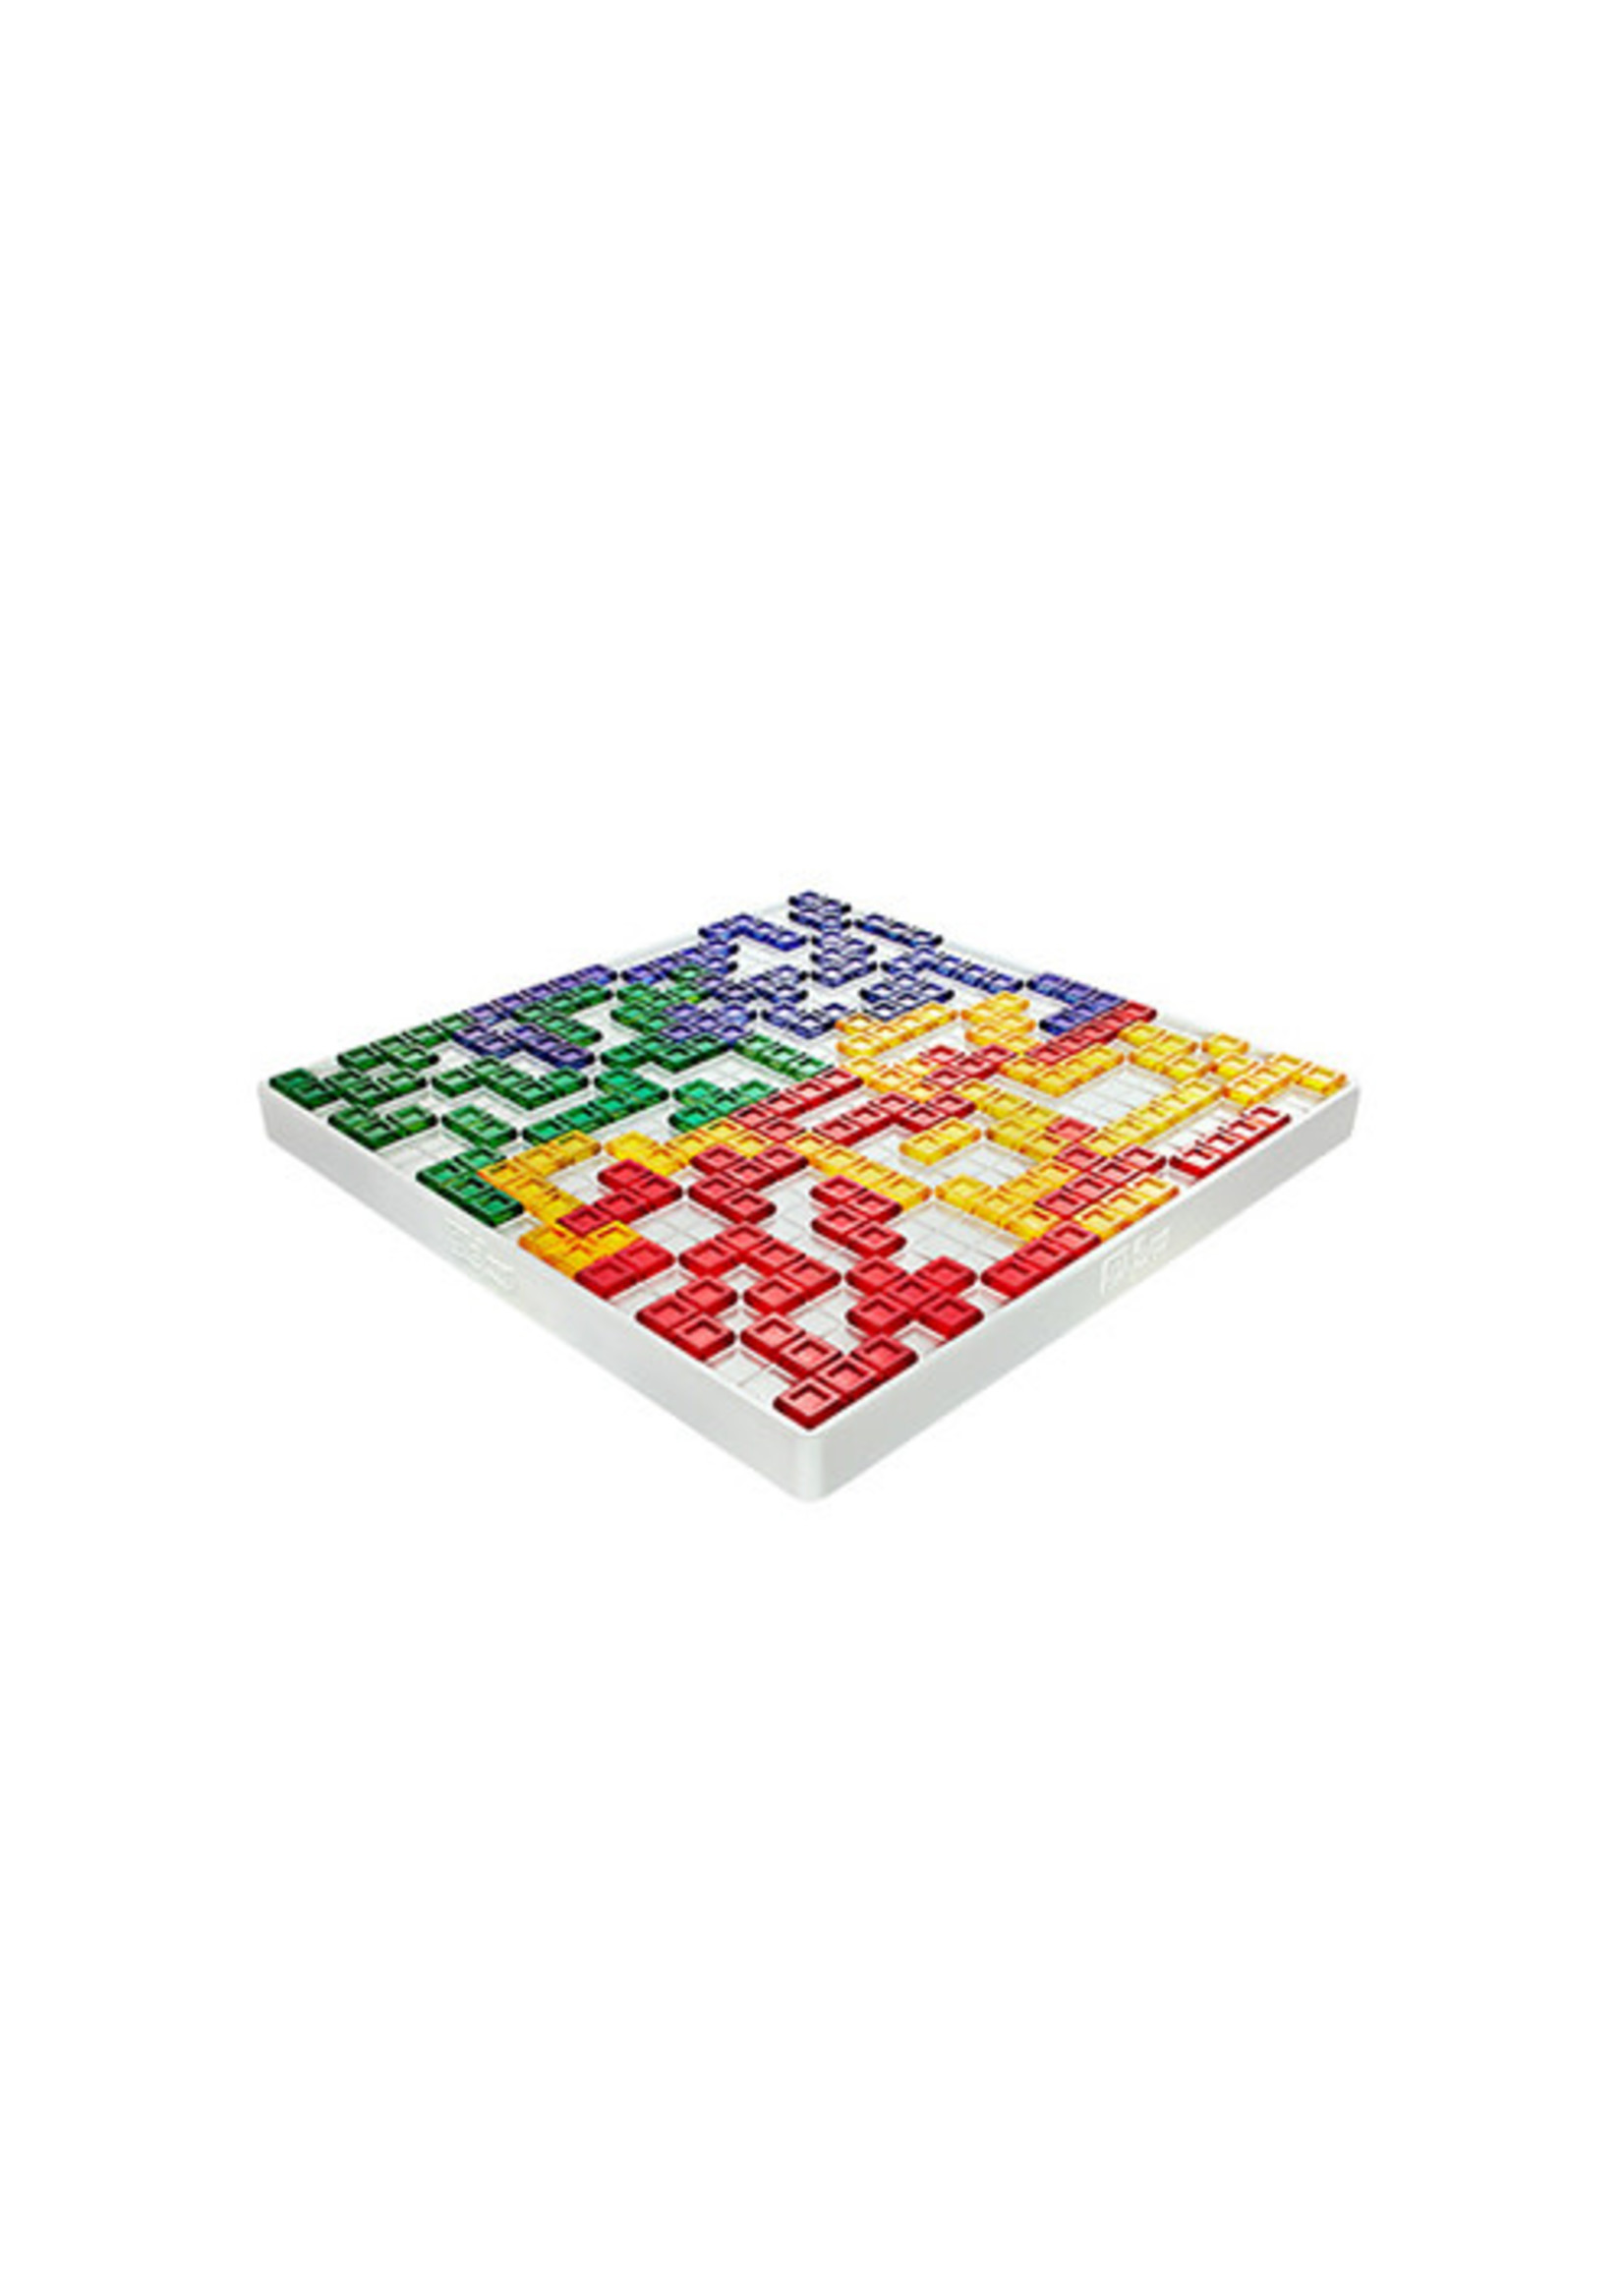 Blokus - Conundrum House Game Library Rental